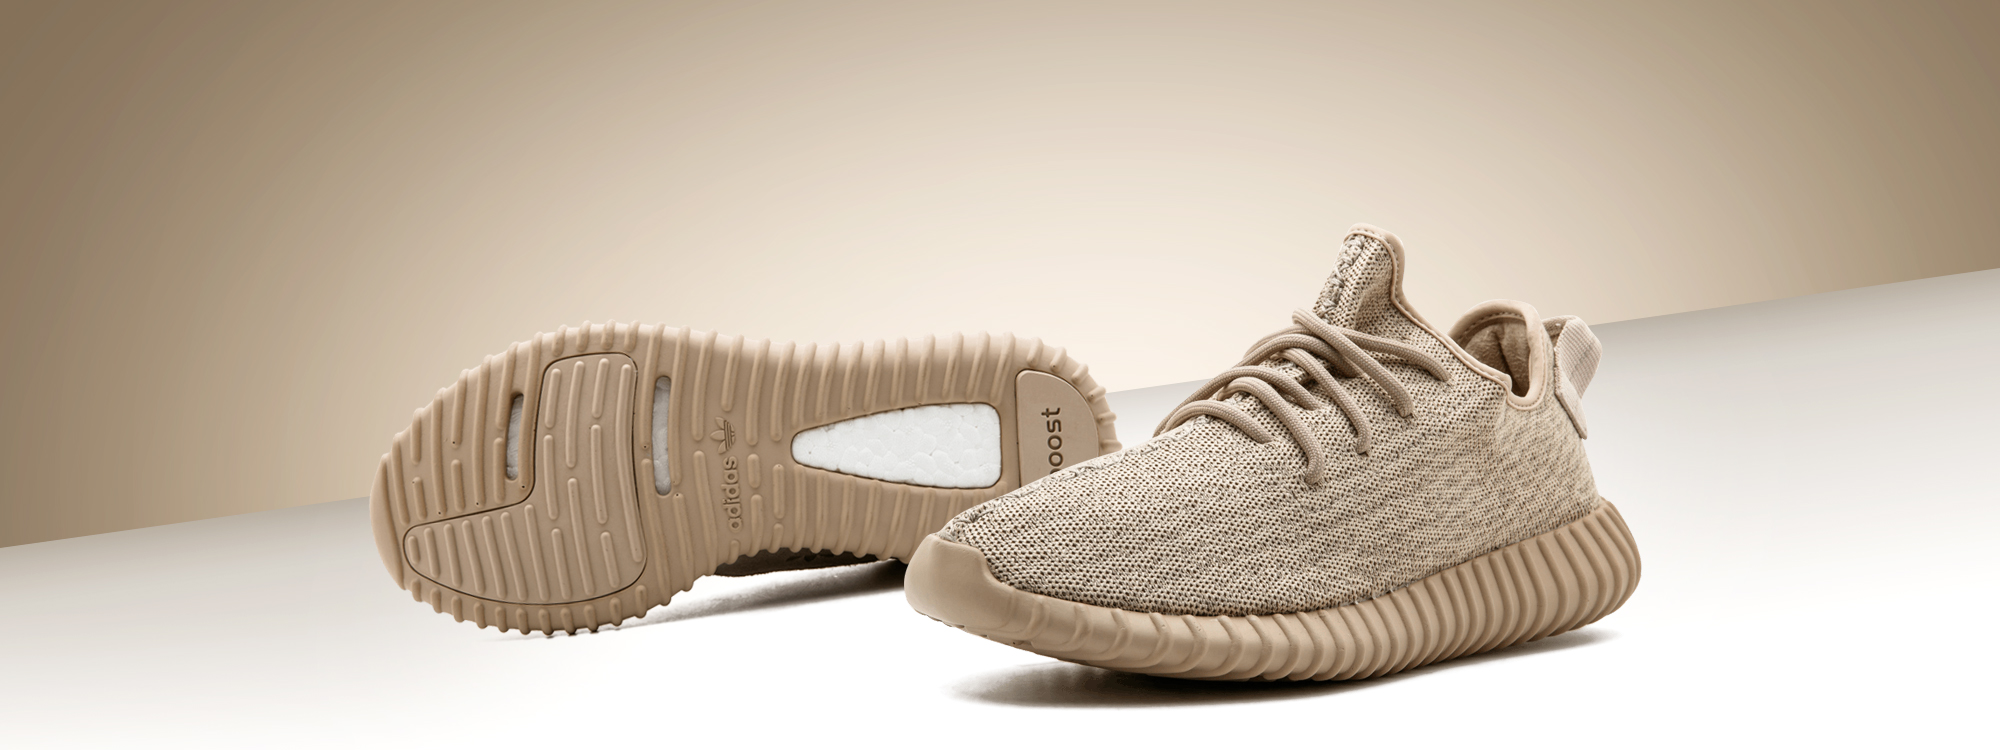 buy authentic  Yeezy  350 Oxford Tan for 195 USD